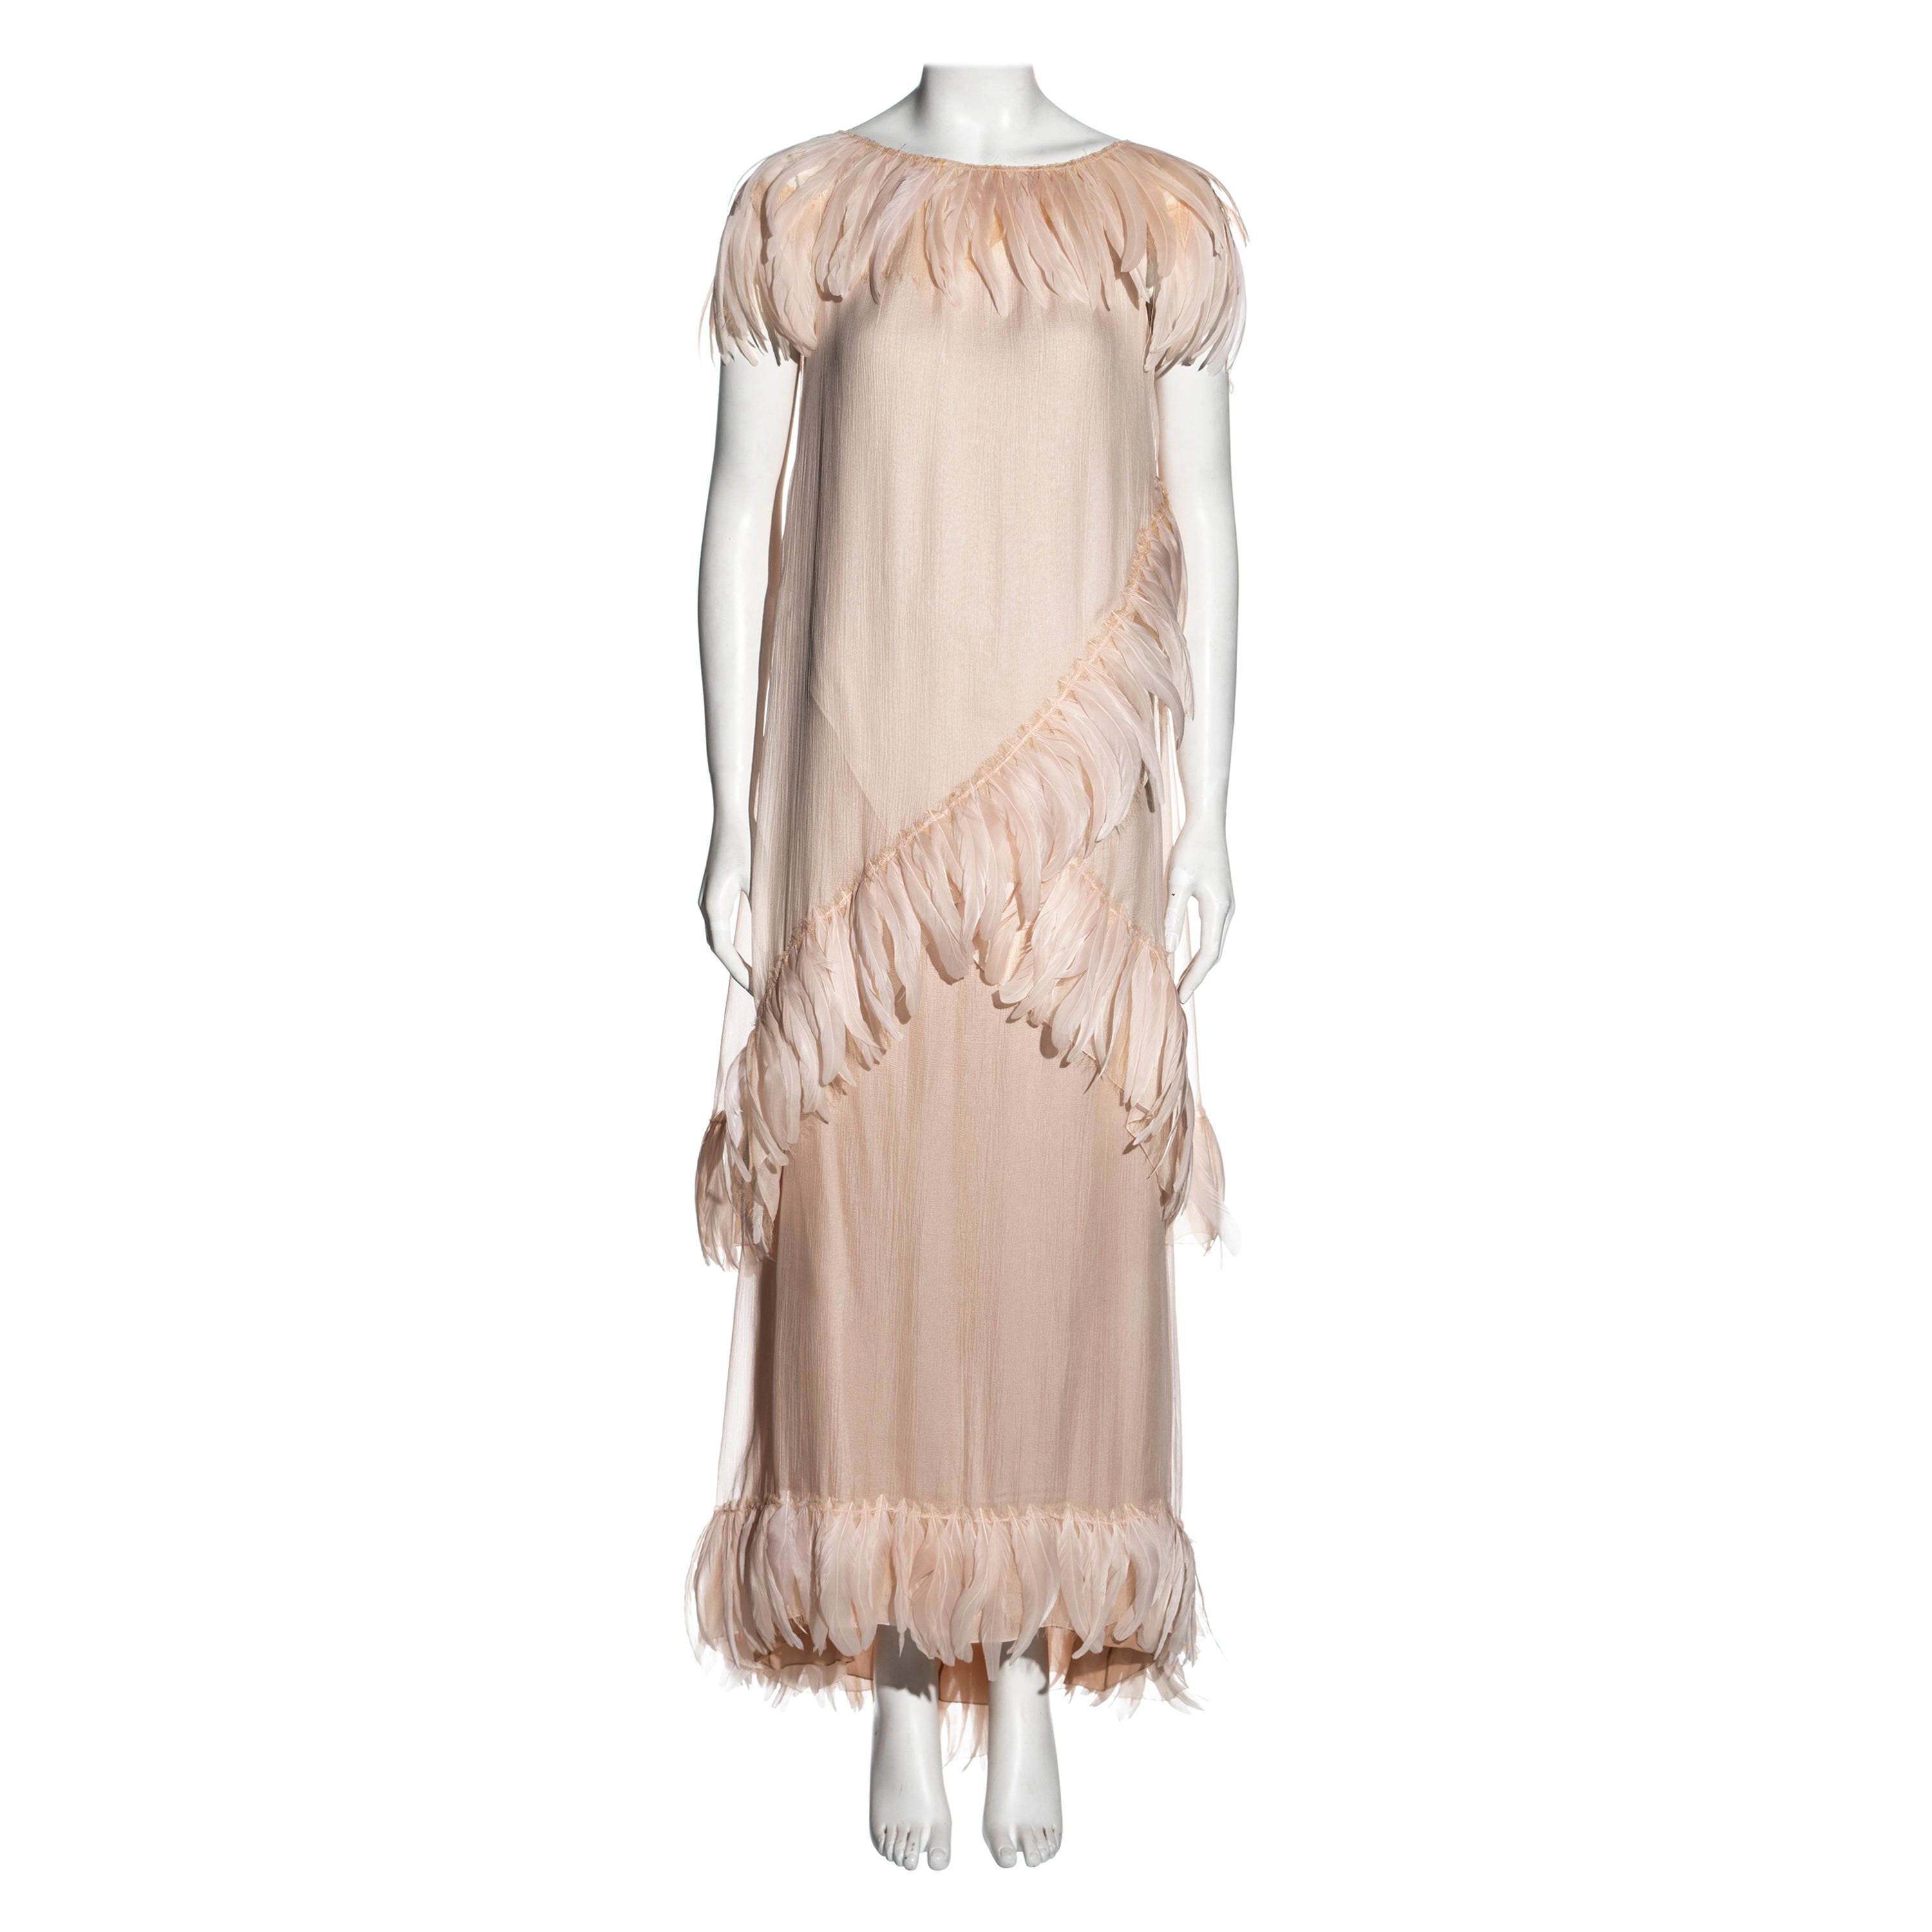 Chanel by Karl Lagerfeld silk chiffon evening dress with feathers, cr 2009